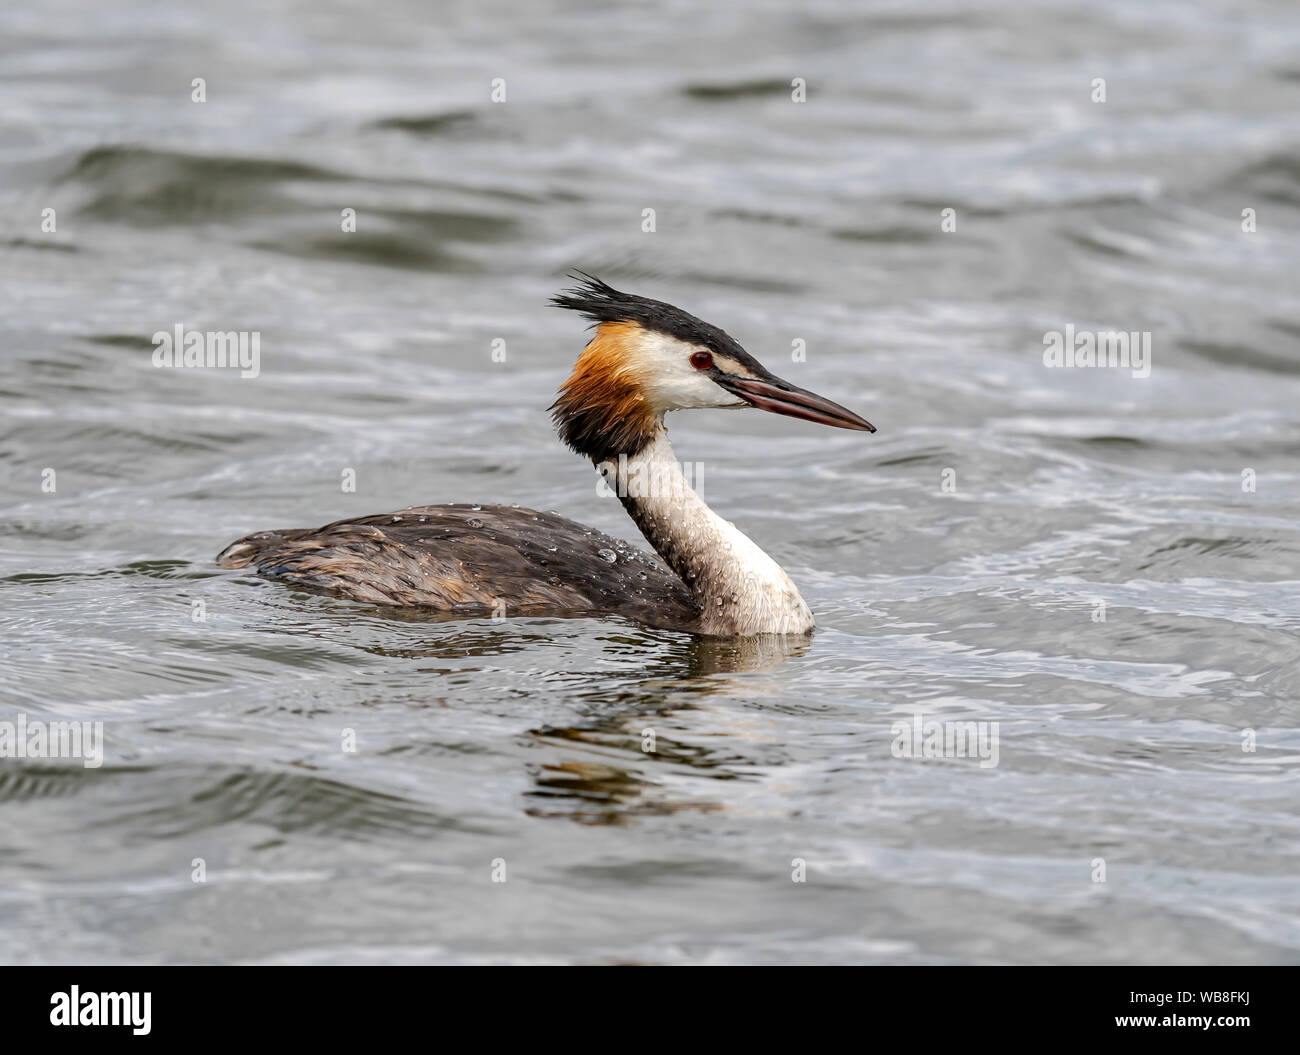 Great crested grebe on a lake Stock Photo